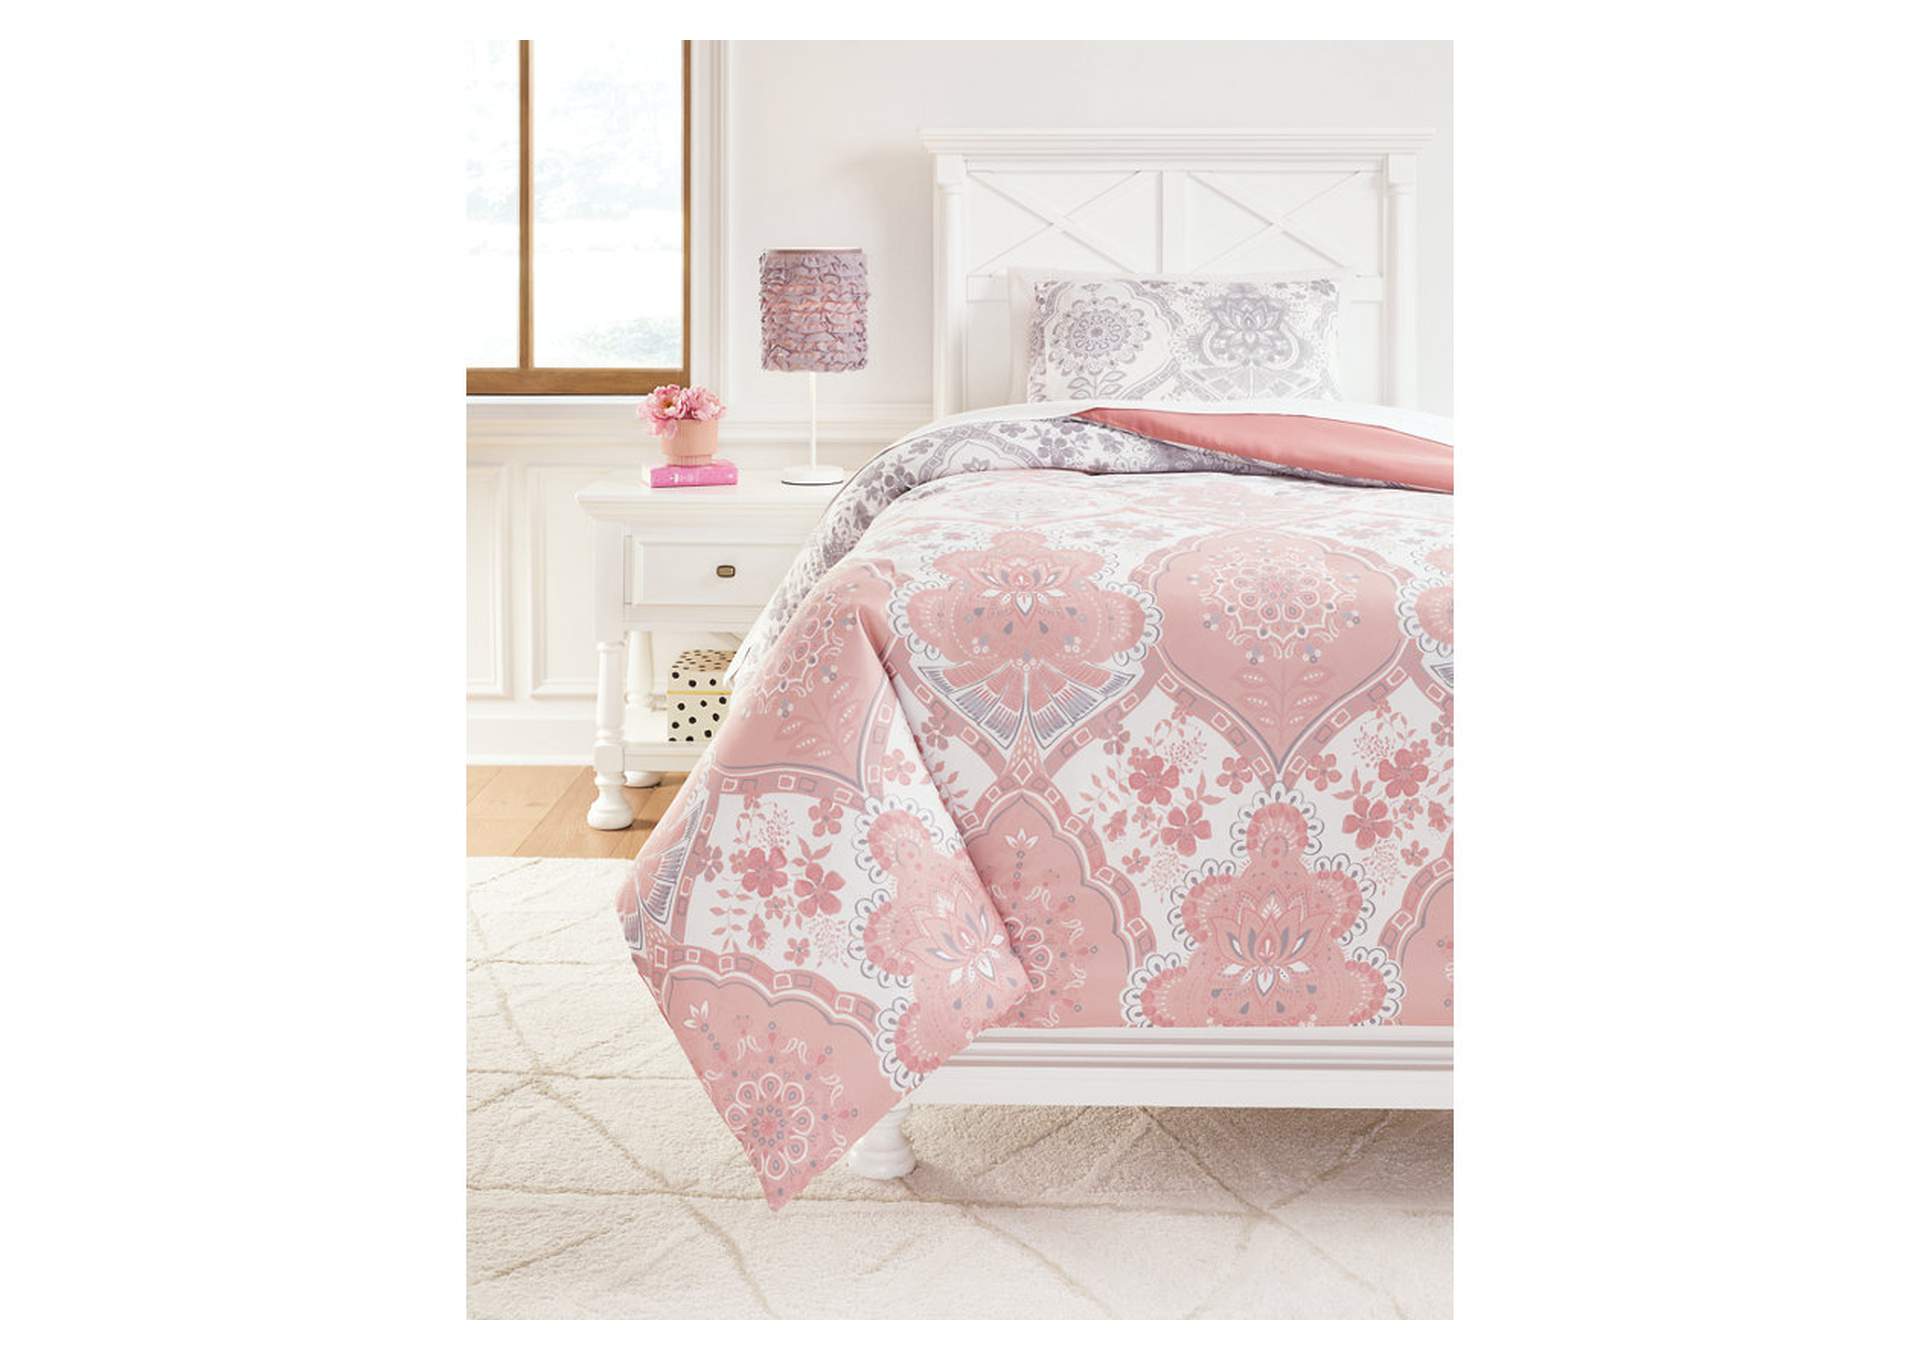 Avaleigh Twin Comforter Set,Signature Design By Ashley